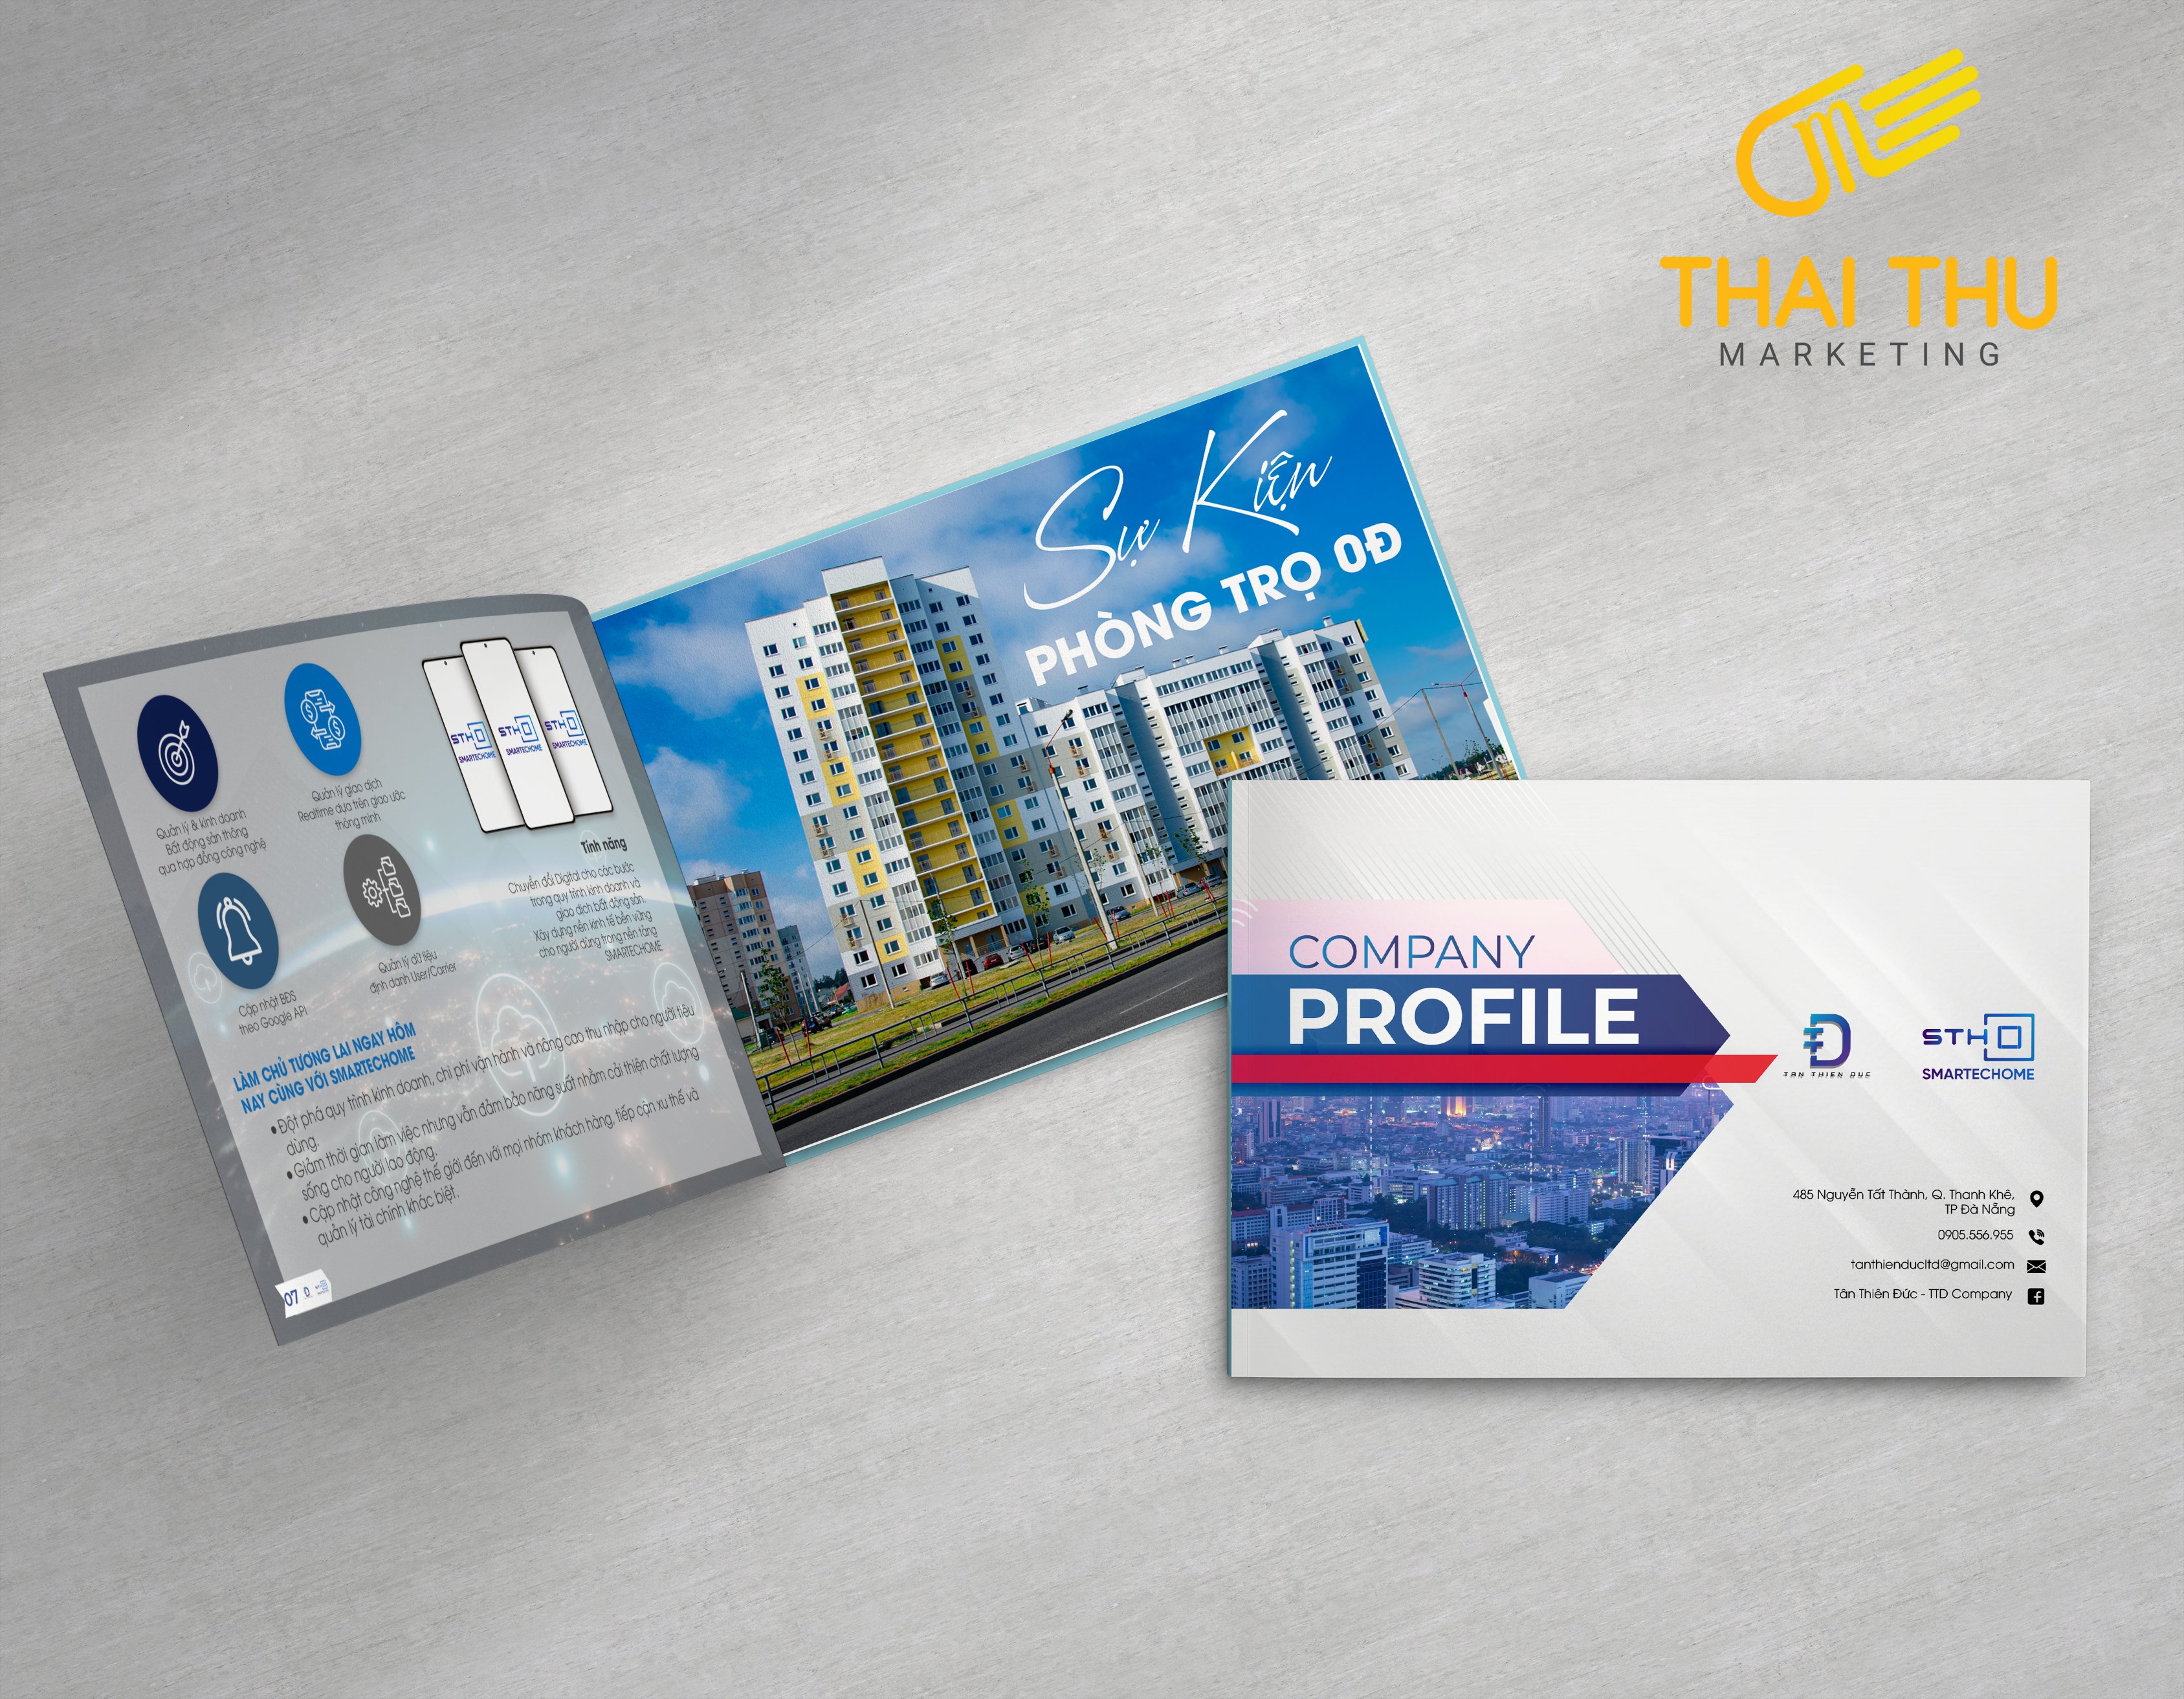 THIẾT KẾ PROFILE CÔNG TY SMARTECHOME